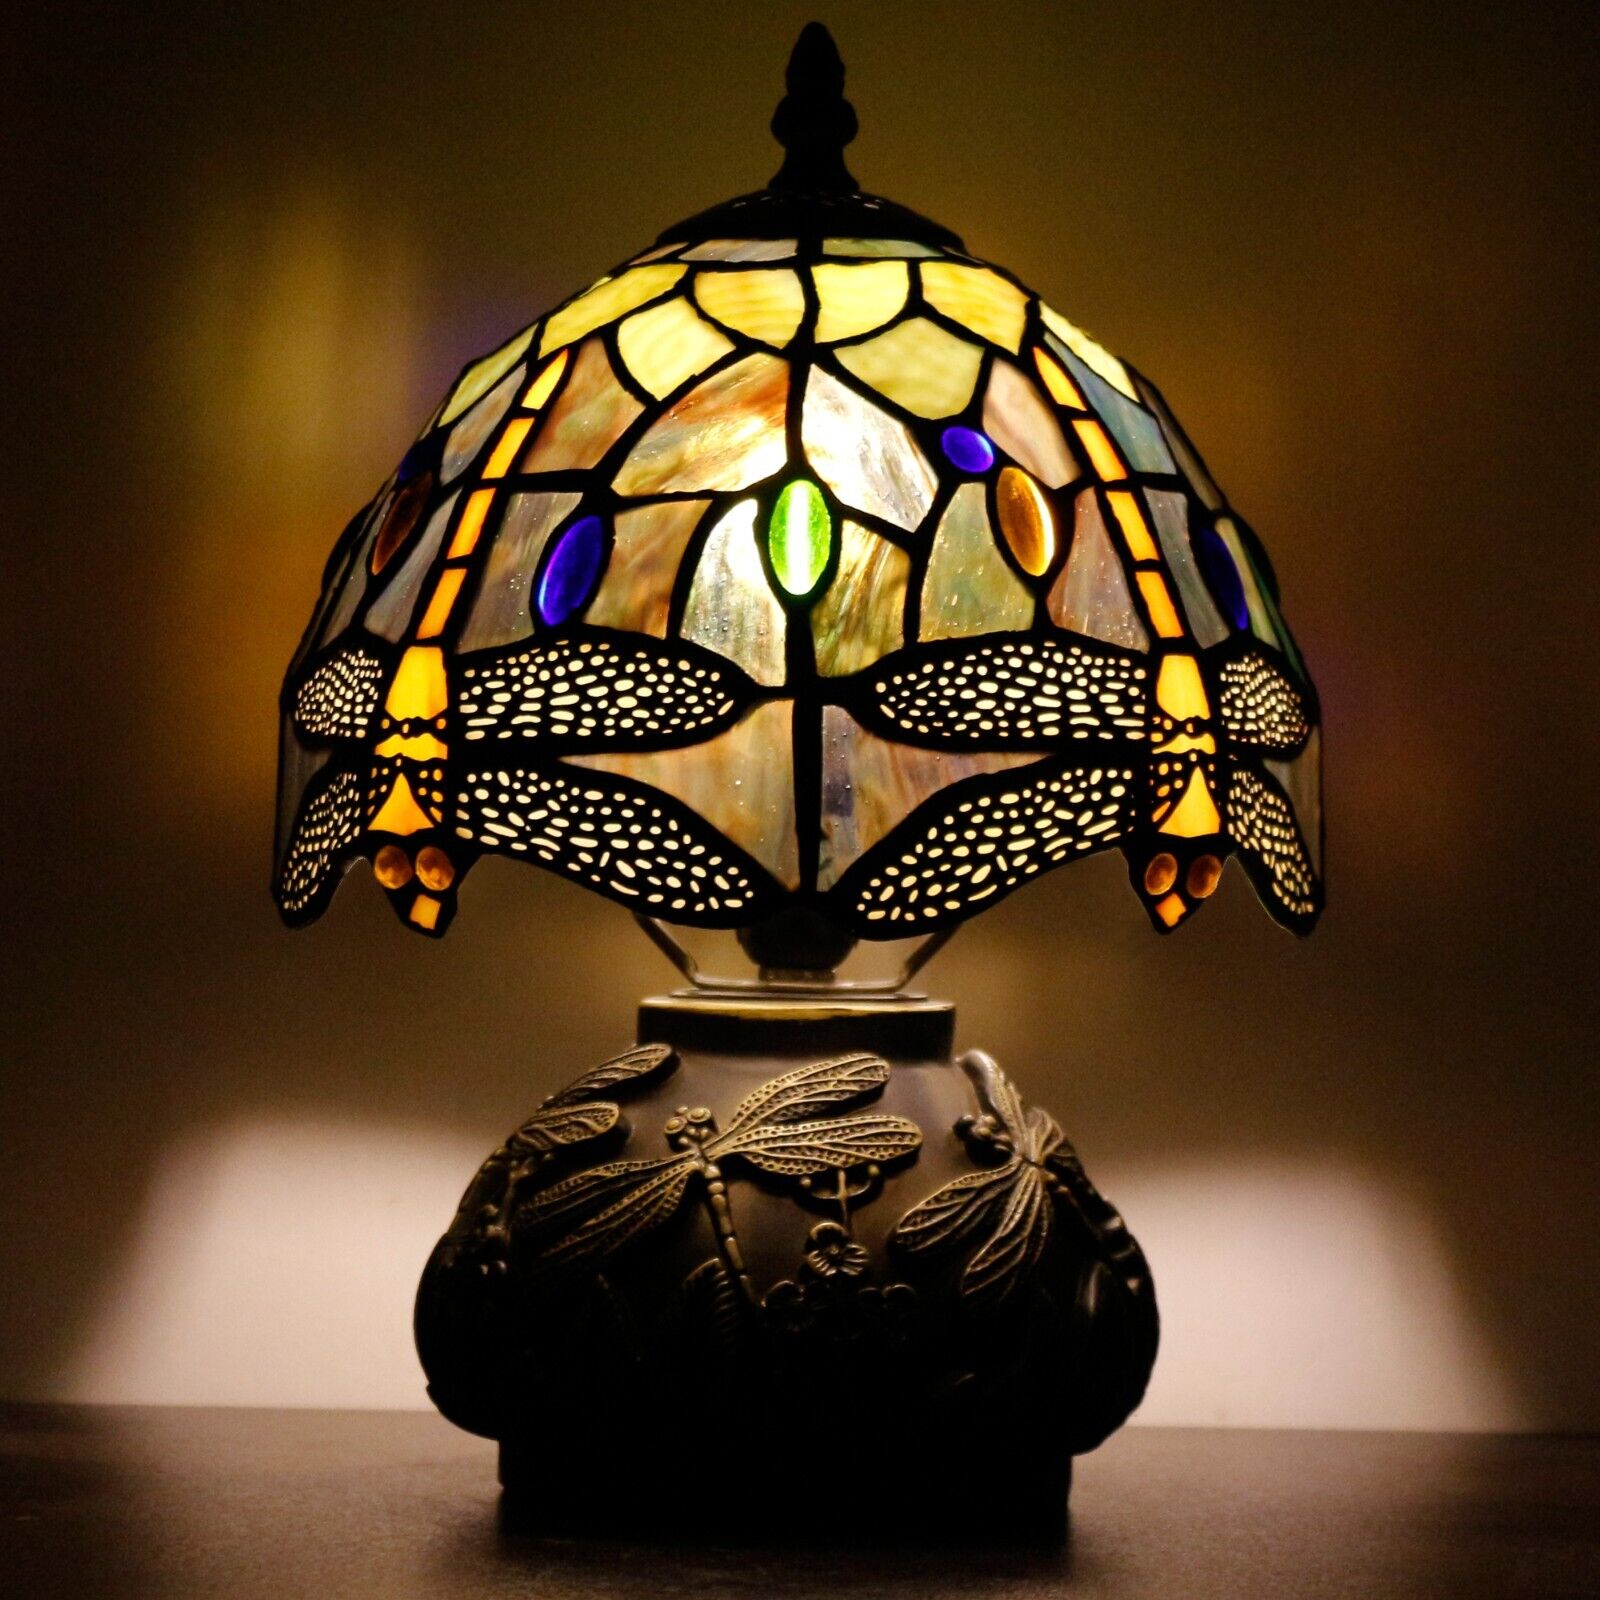 Small Tiffany Table Lamp Yellow Dragonfly Style Stained Glass Desk Lamp 10 INCH